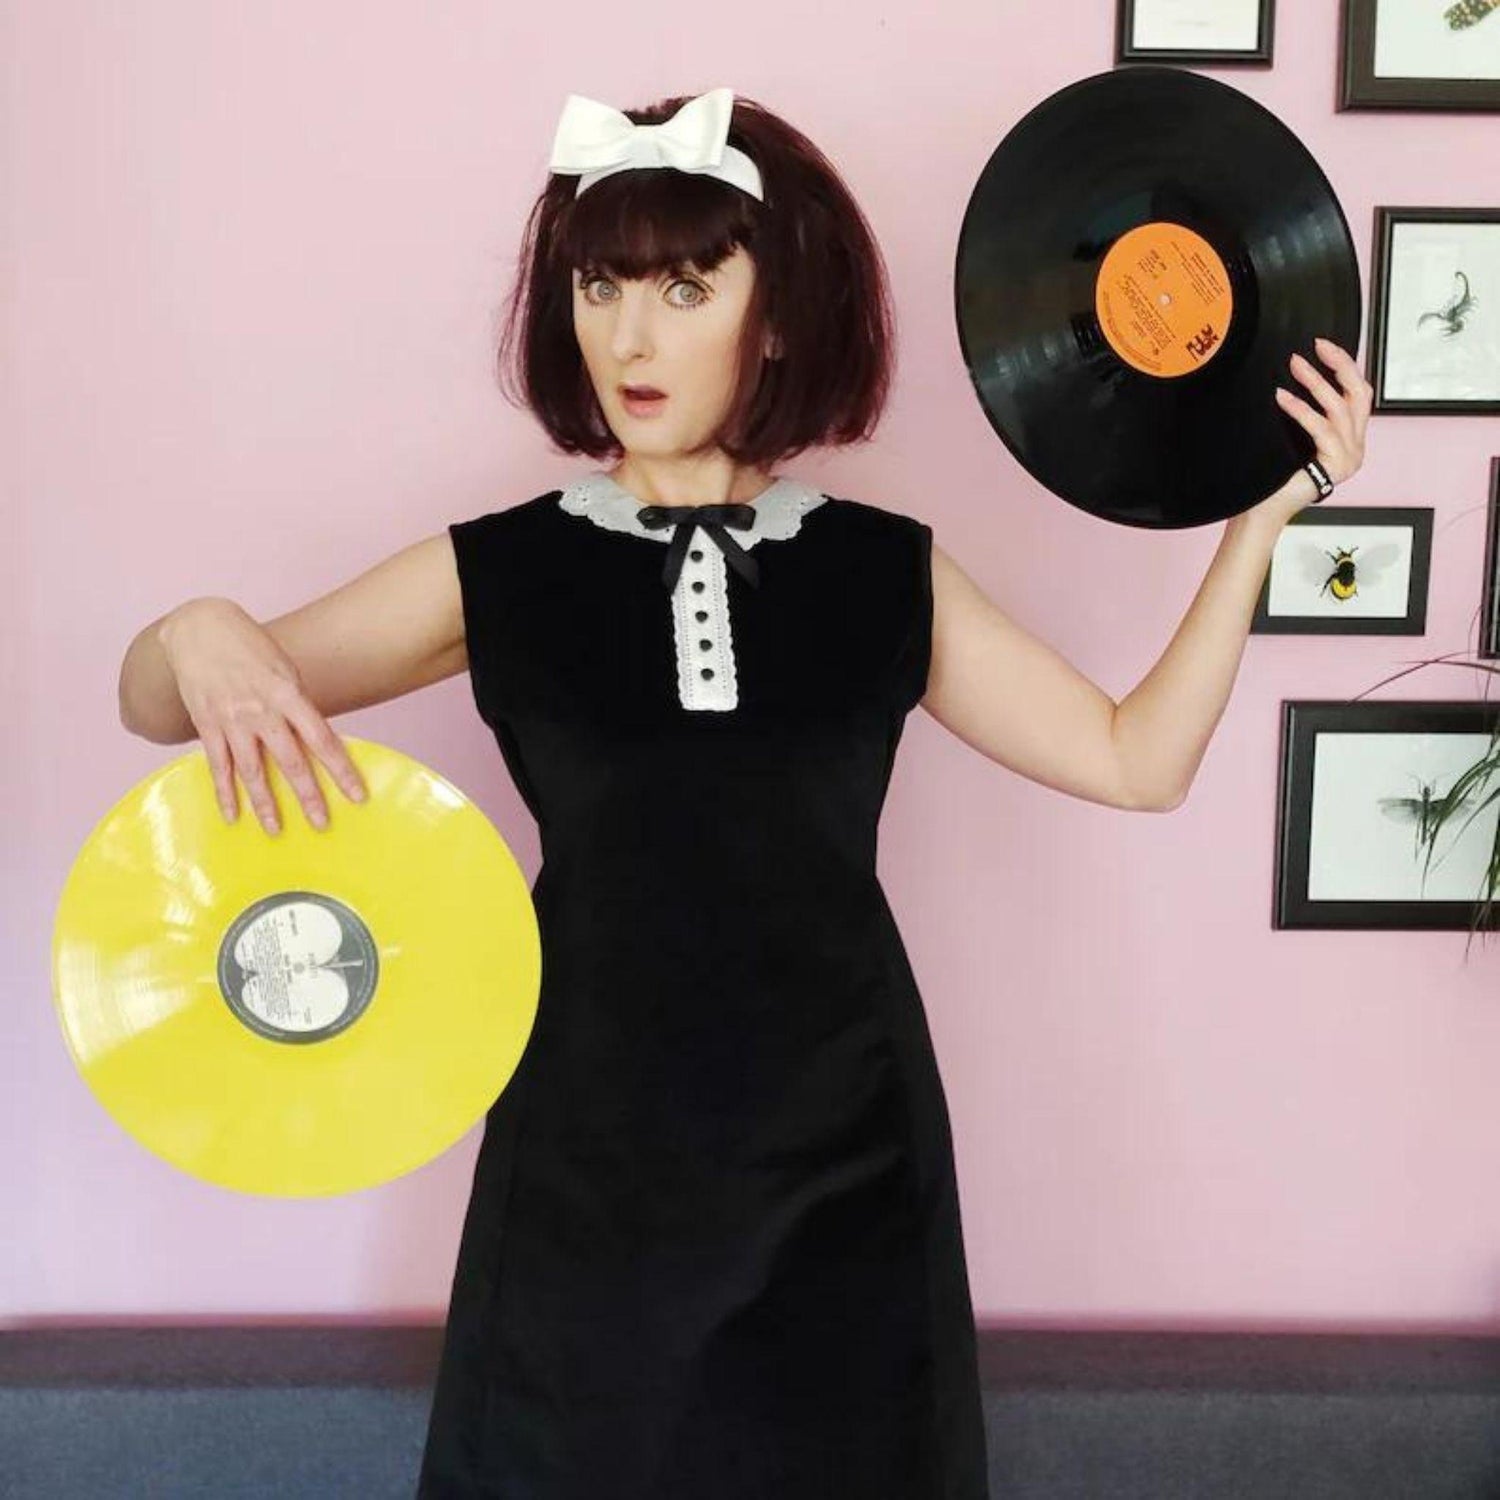 Woman wearing a 1960's Pattern, Mary Quant Style A-Line Mod Dress with vinyl records in her hands